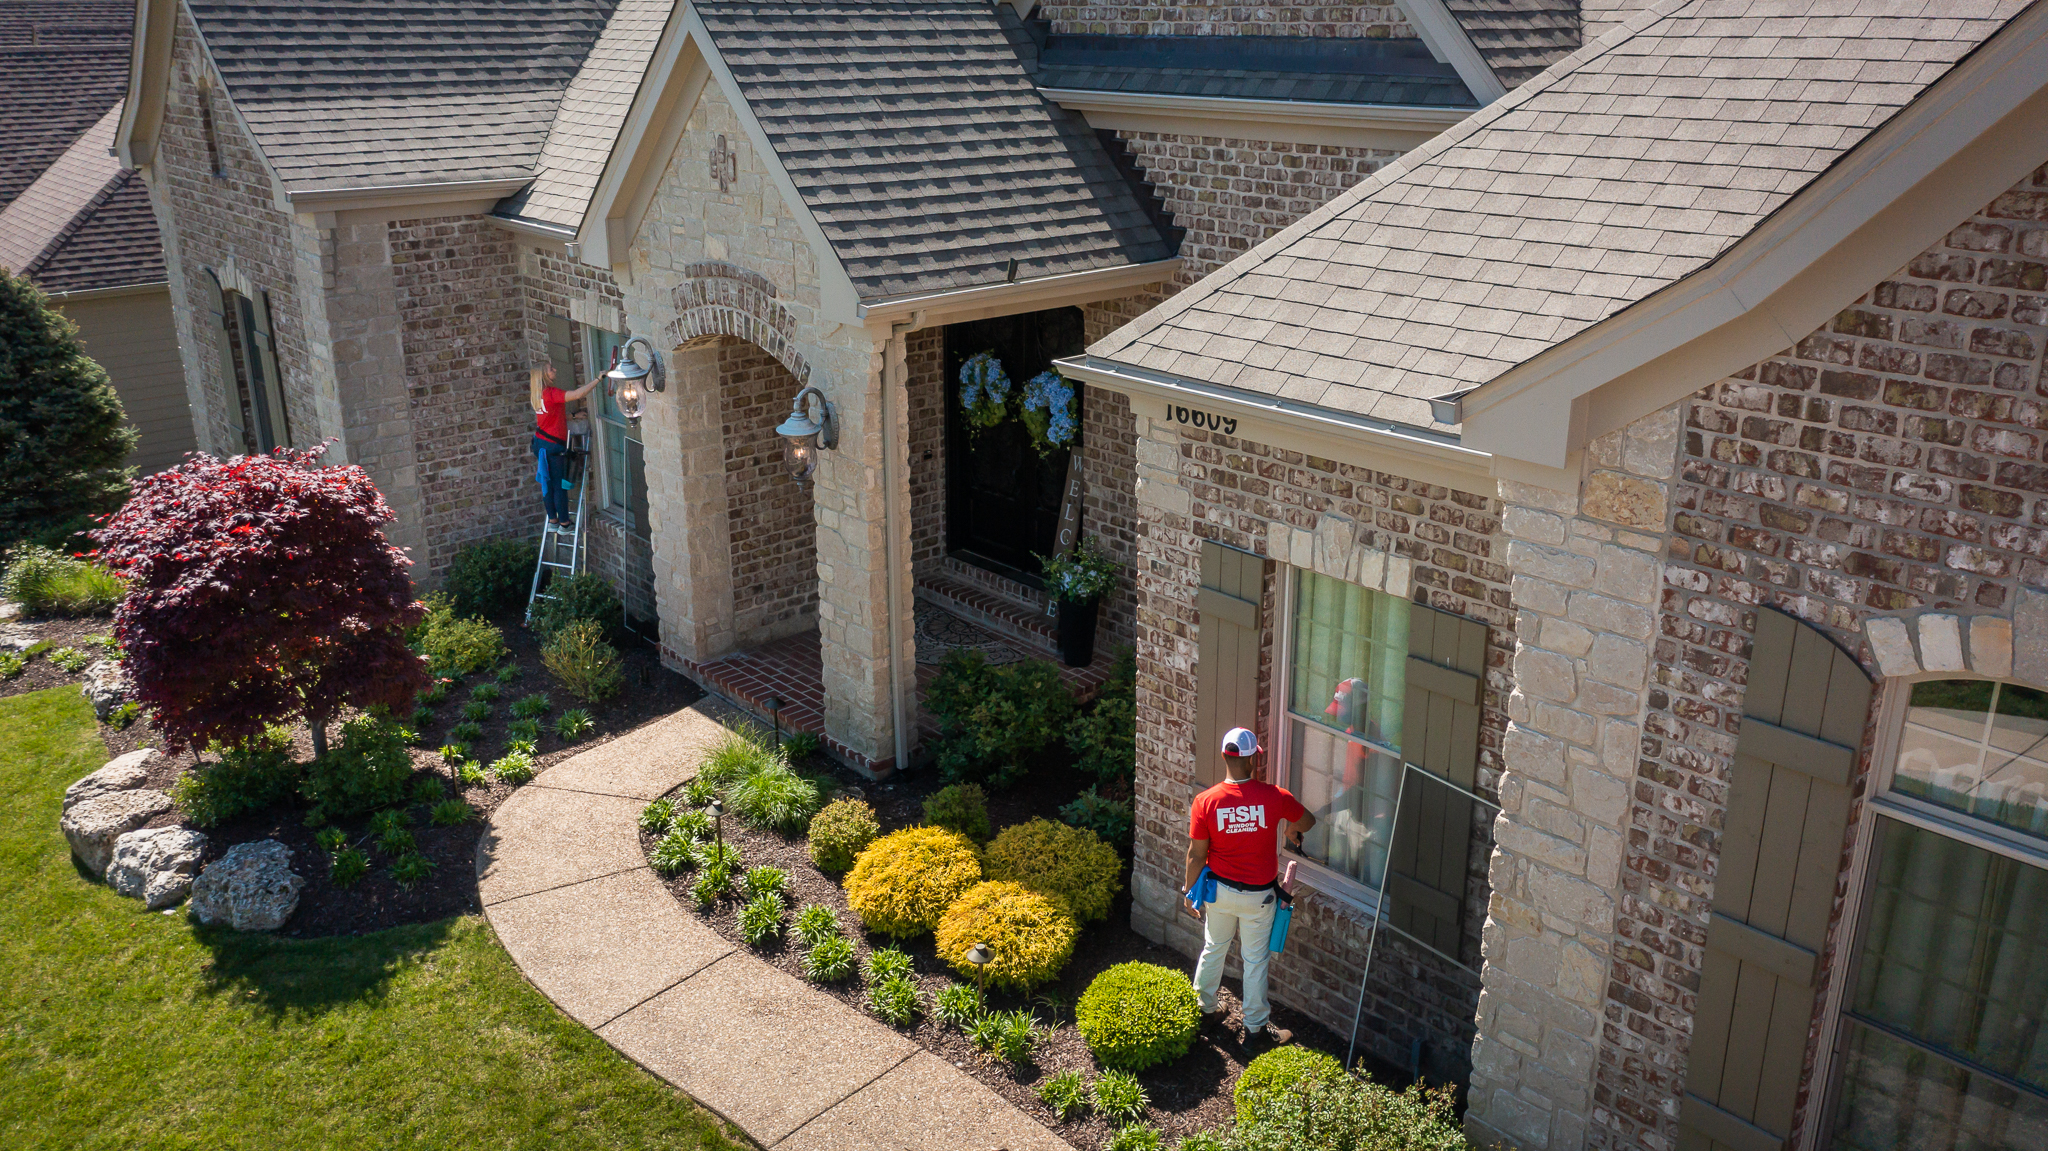 Aerial View of Home with Two FISH Window Cleaners Cleaning Windows